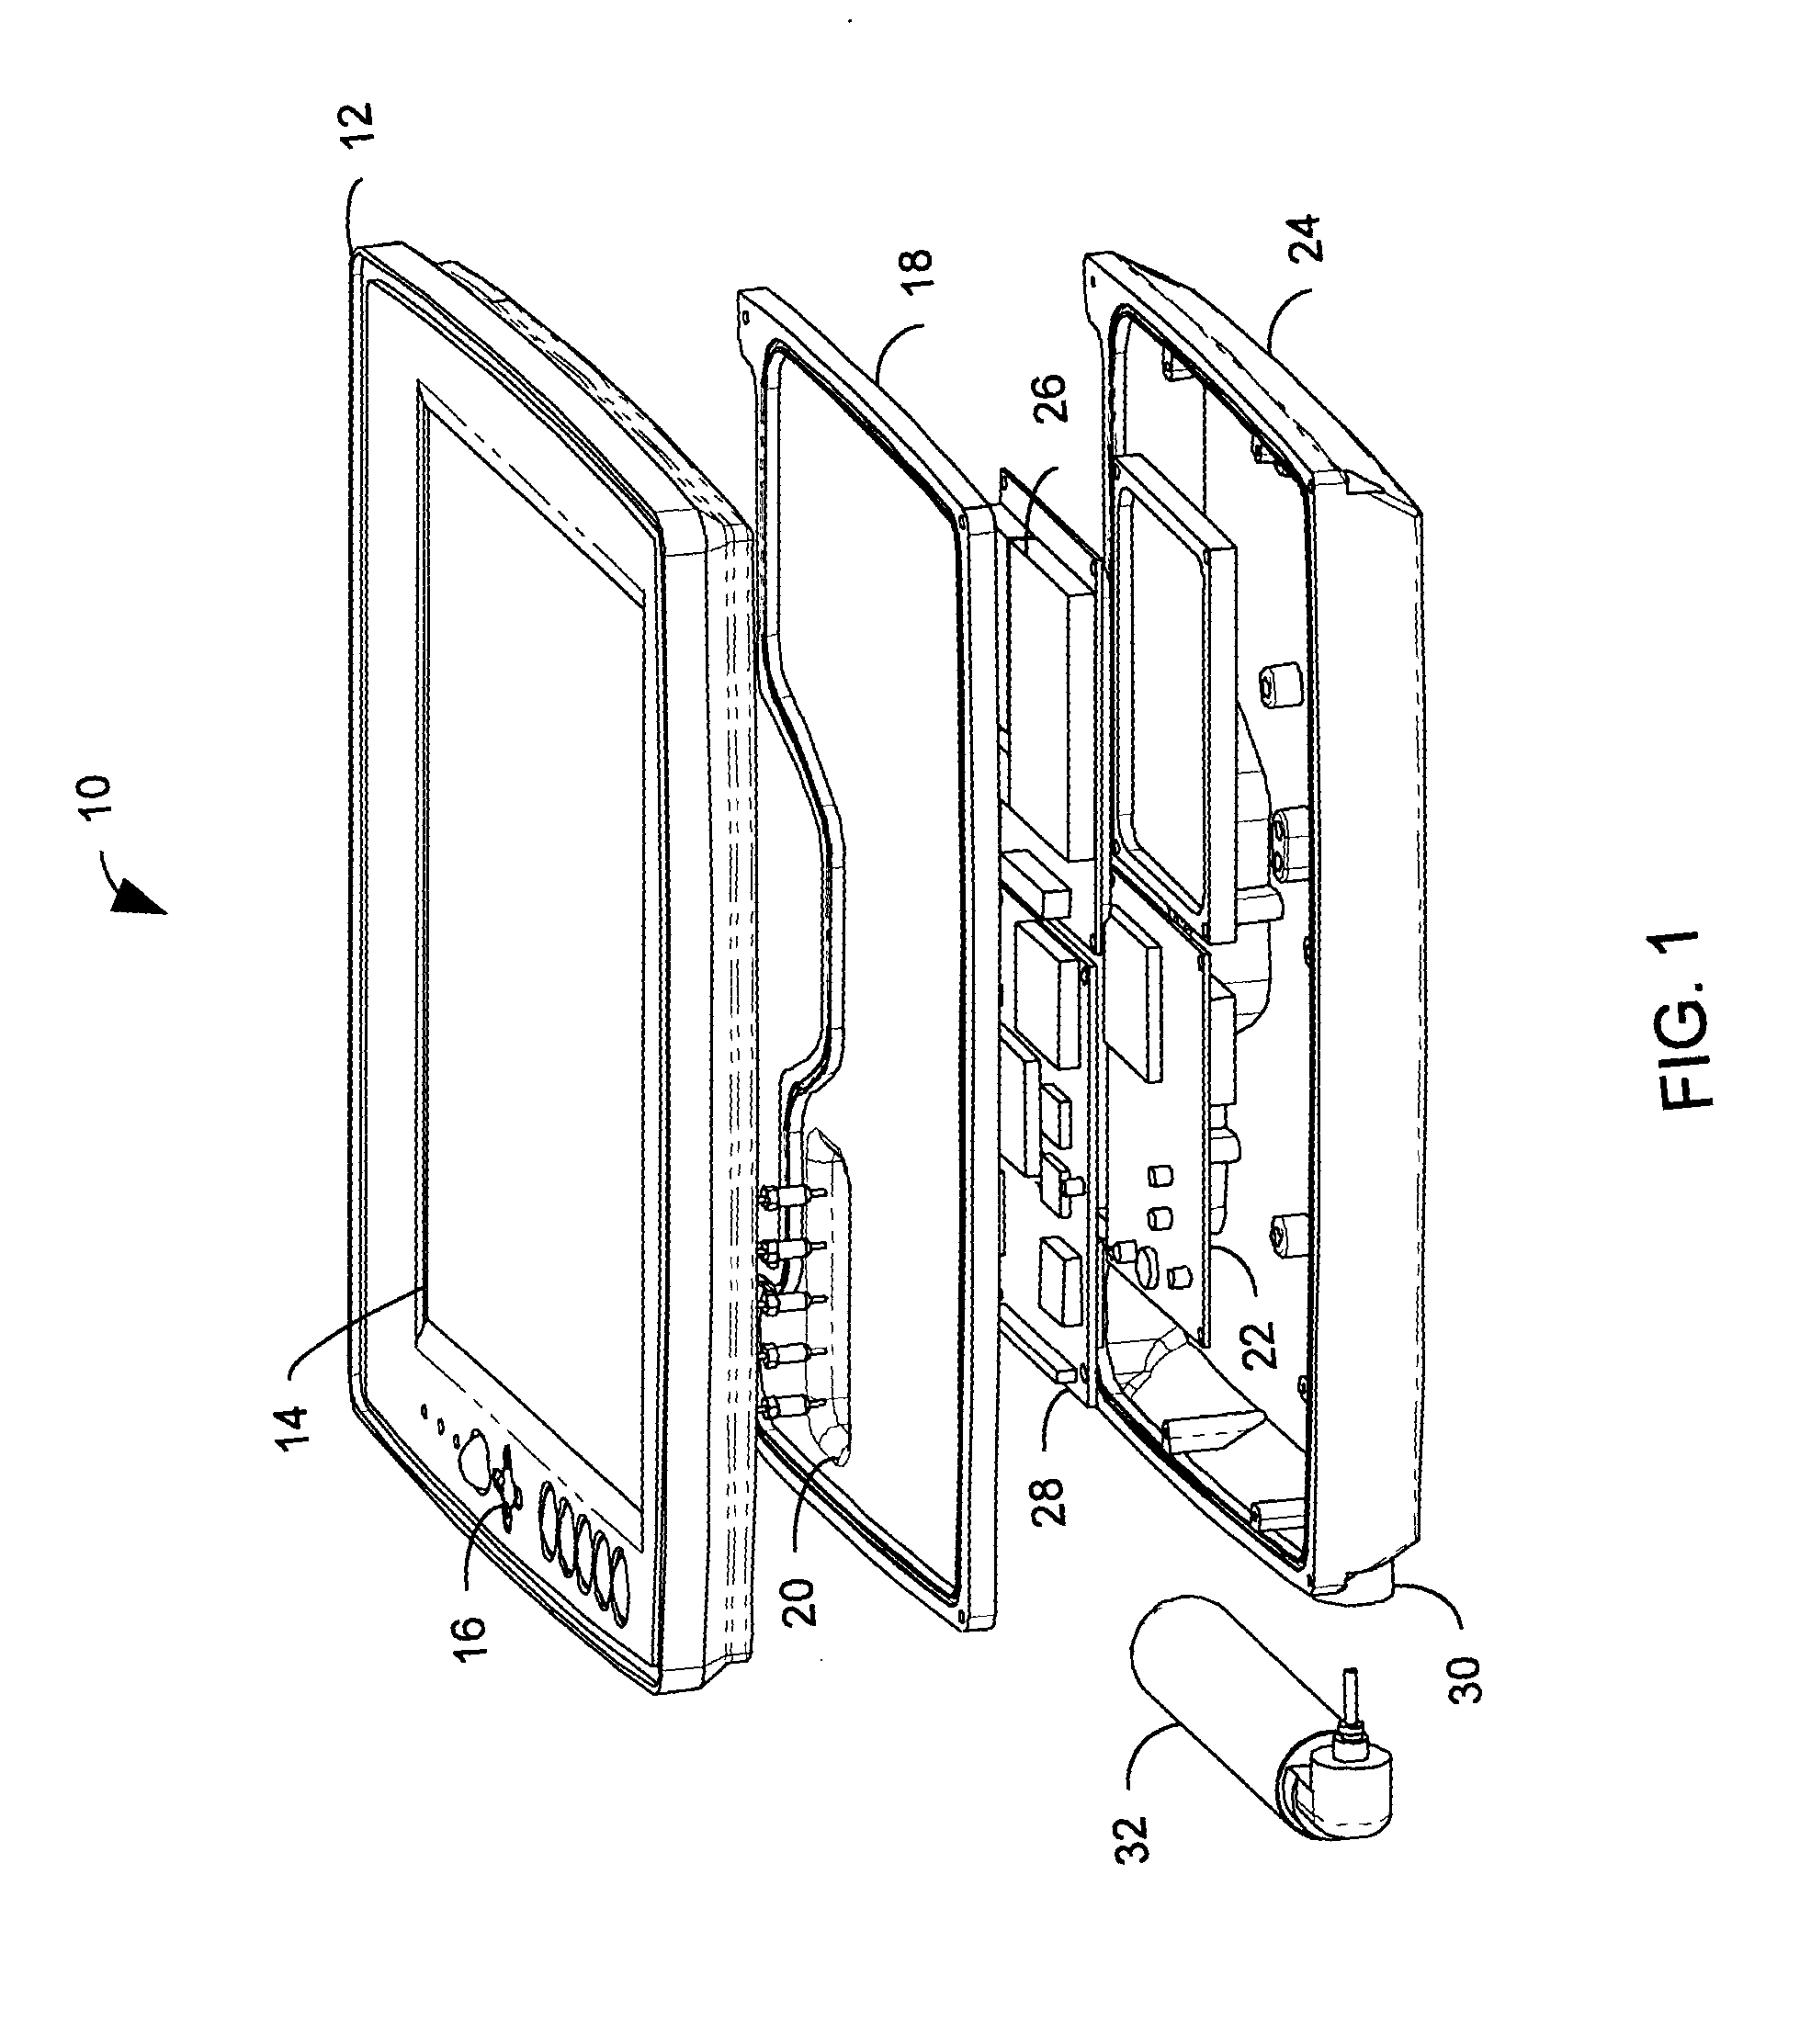 Dismount tablet computer assembly for wireless communication applications